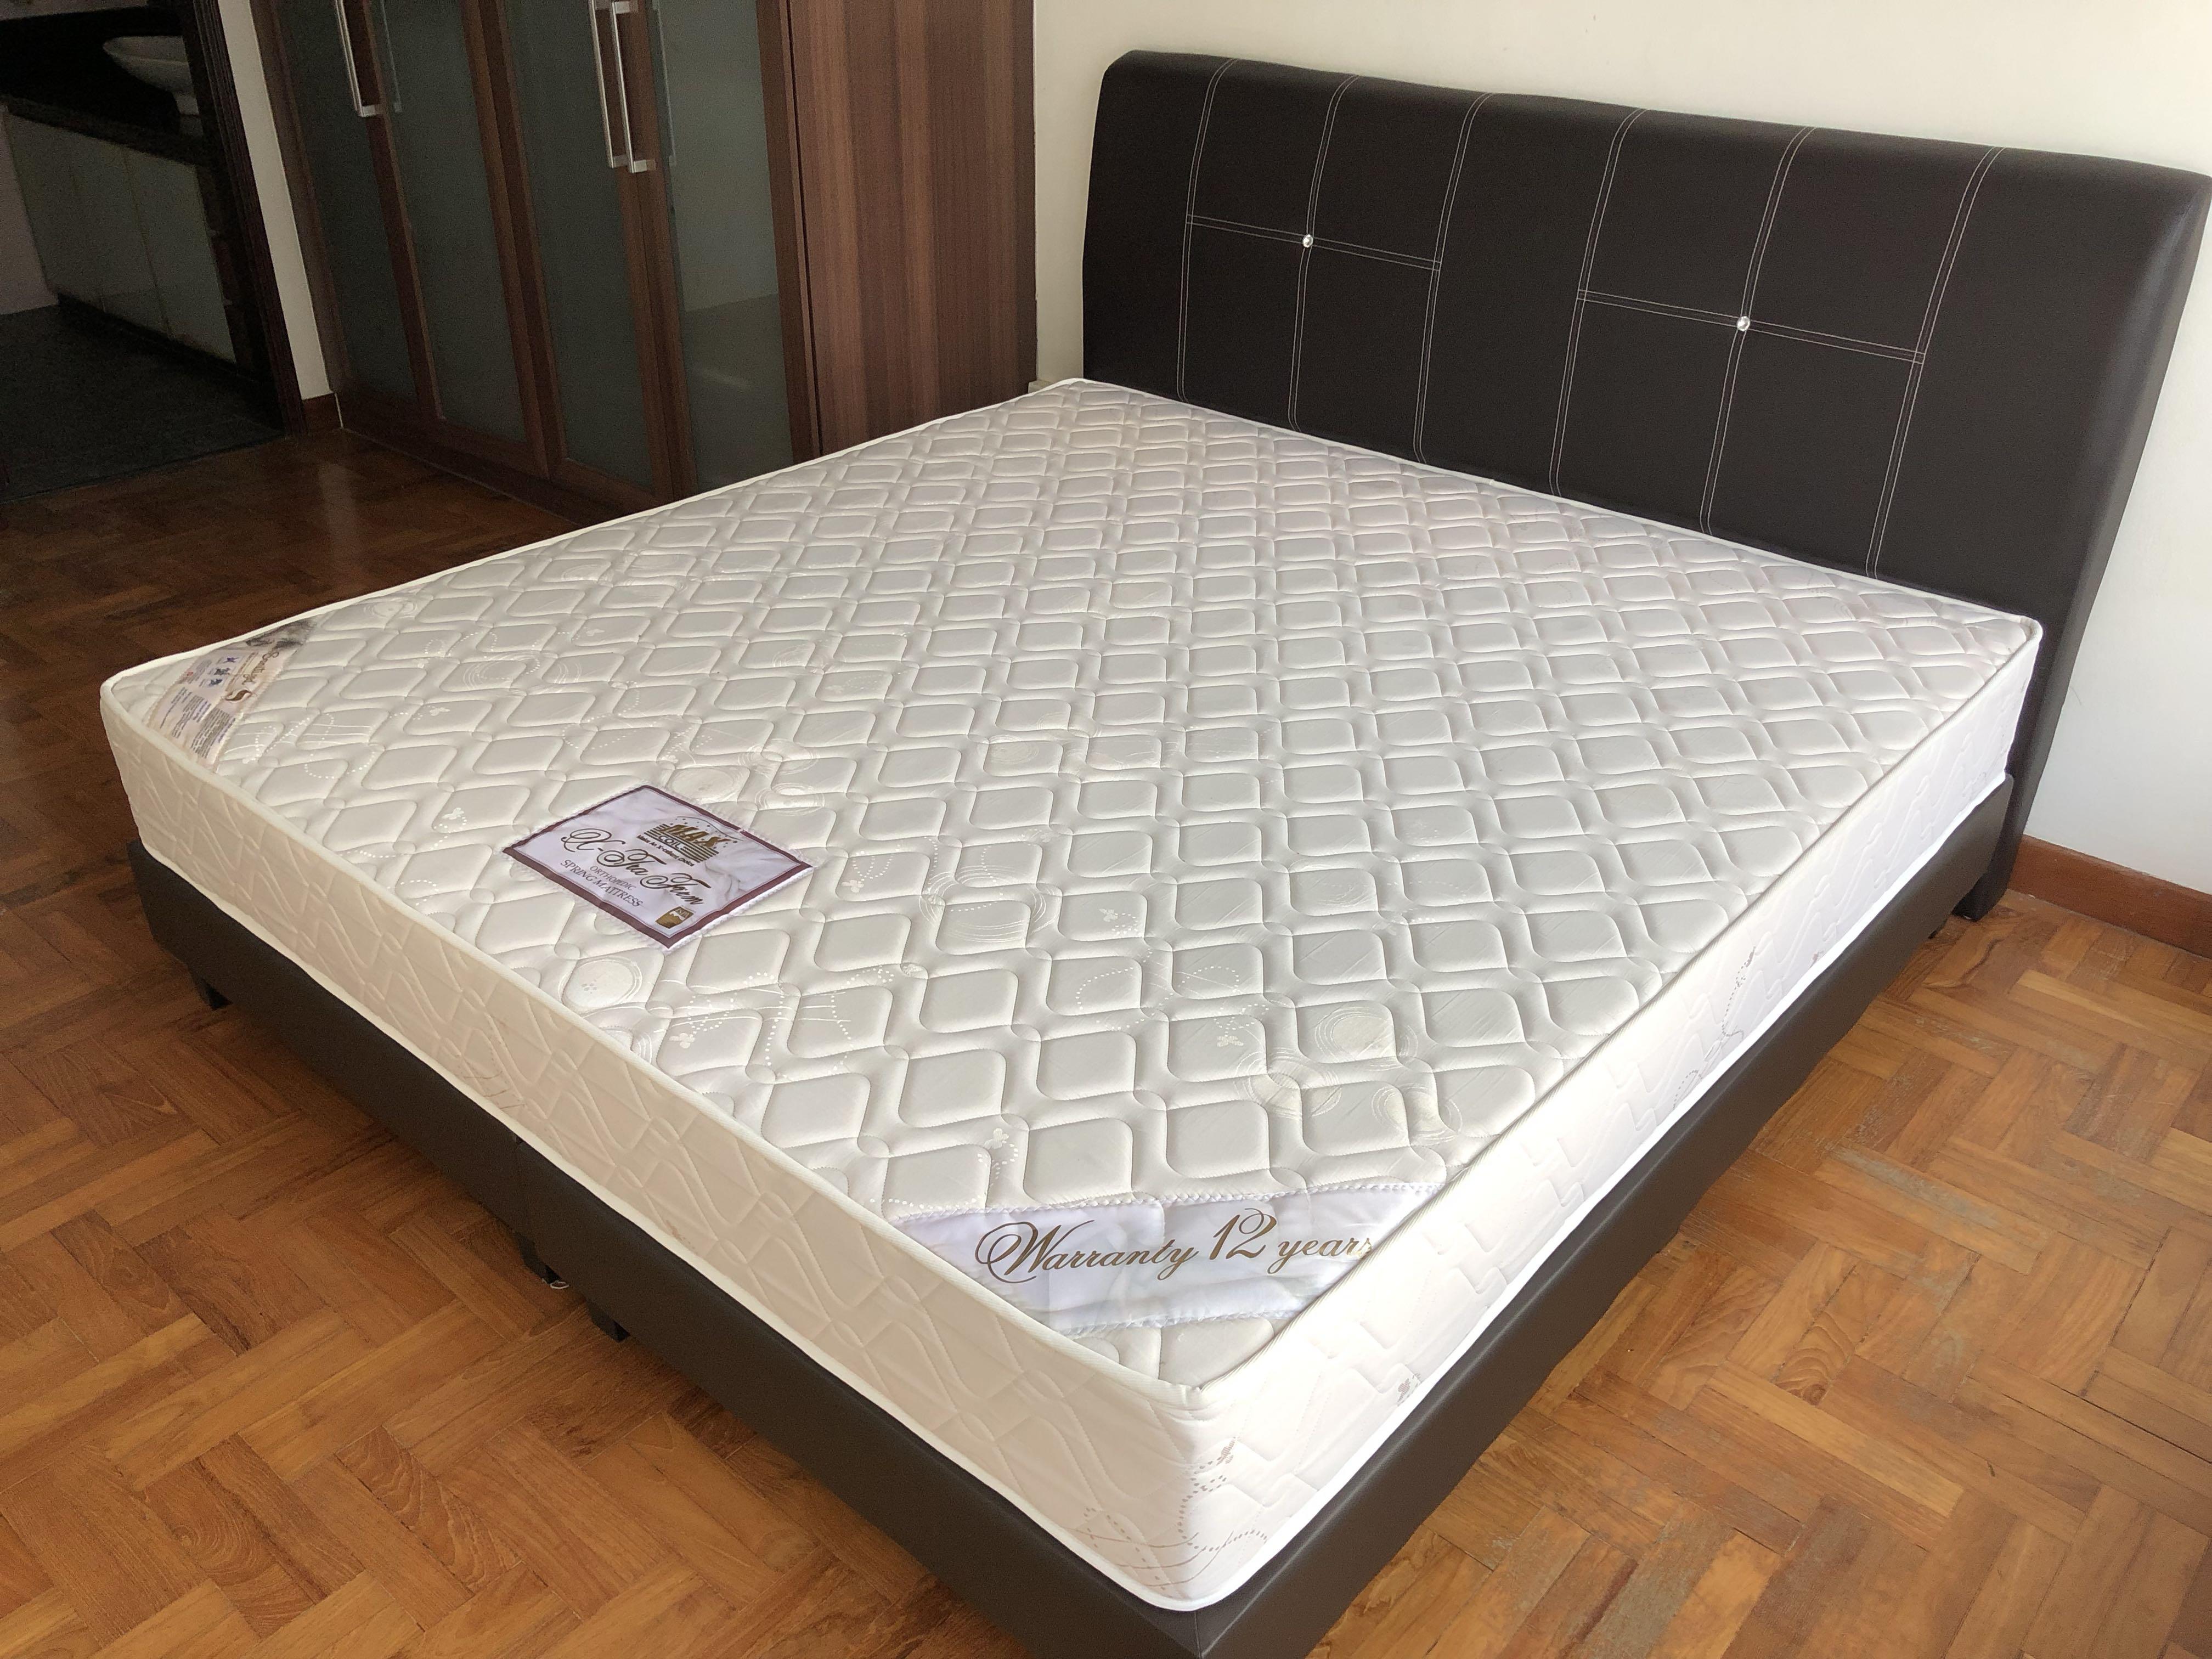 hanwell ex tra firm mattress review amazon